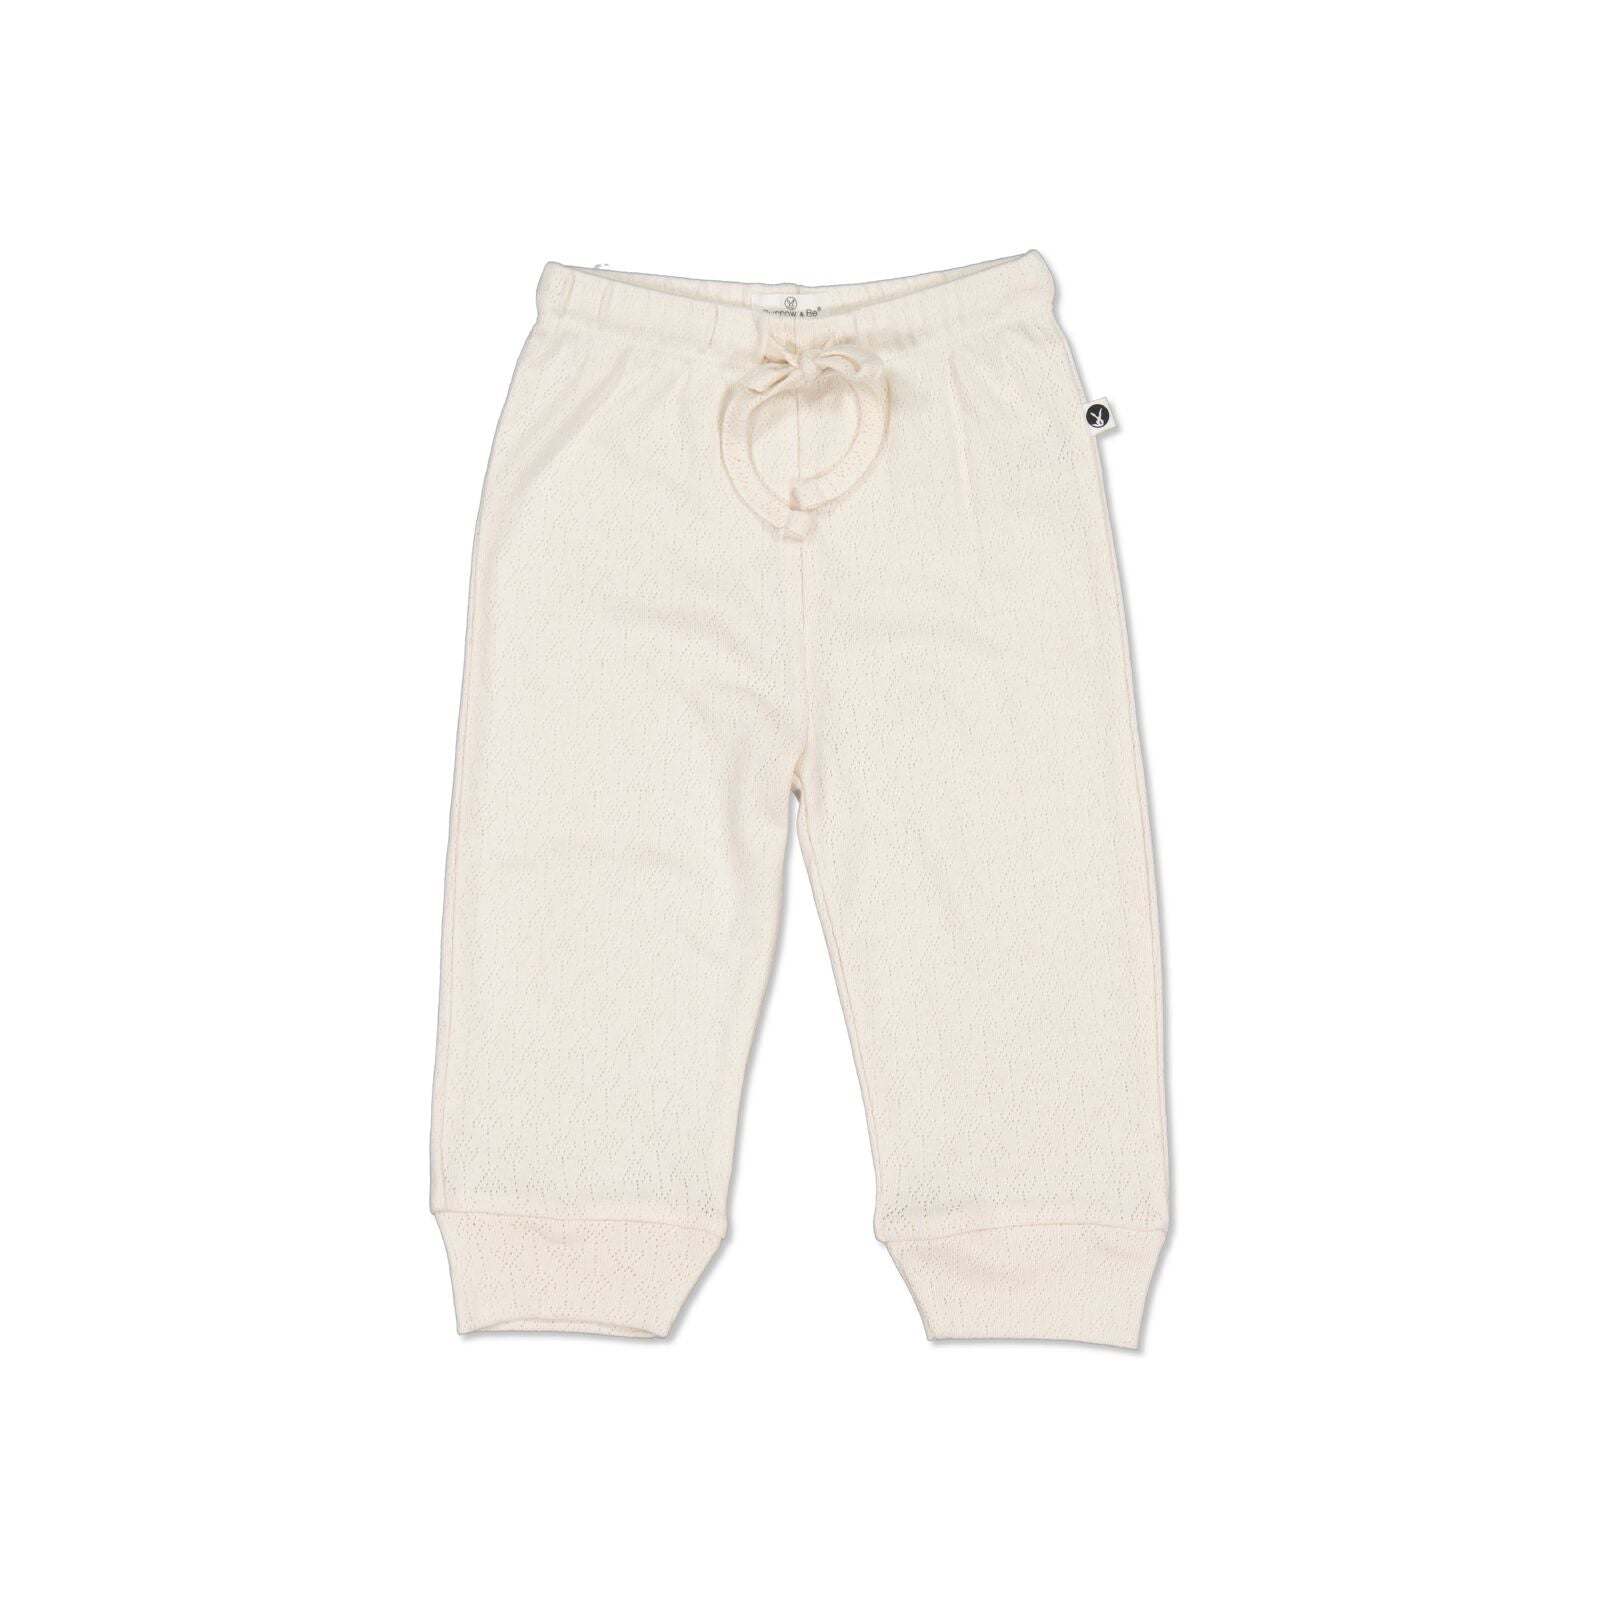 Burrow & Be Unisex Pants Pointelle Baby Pants - Natural